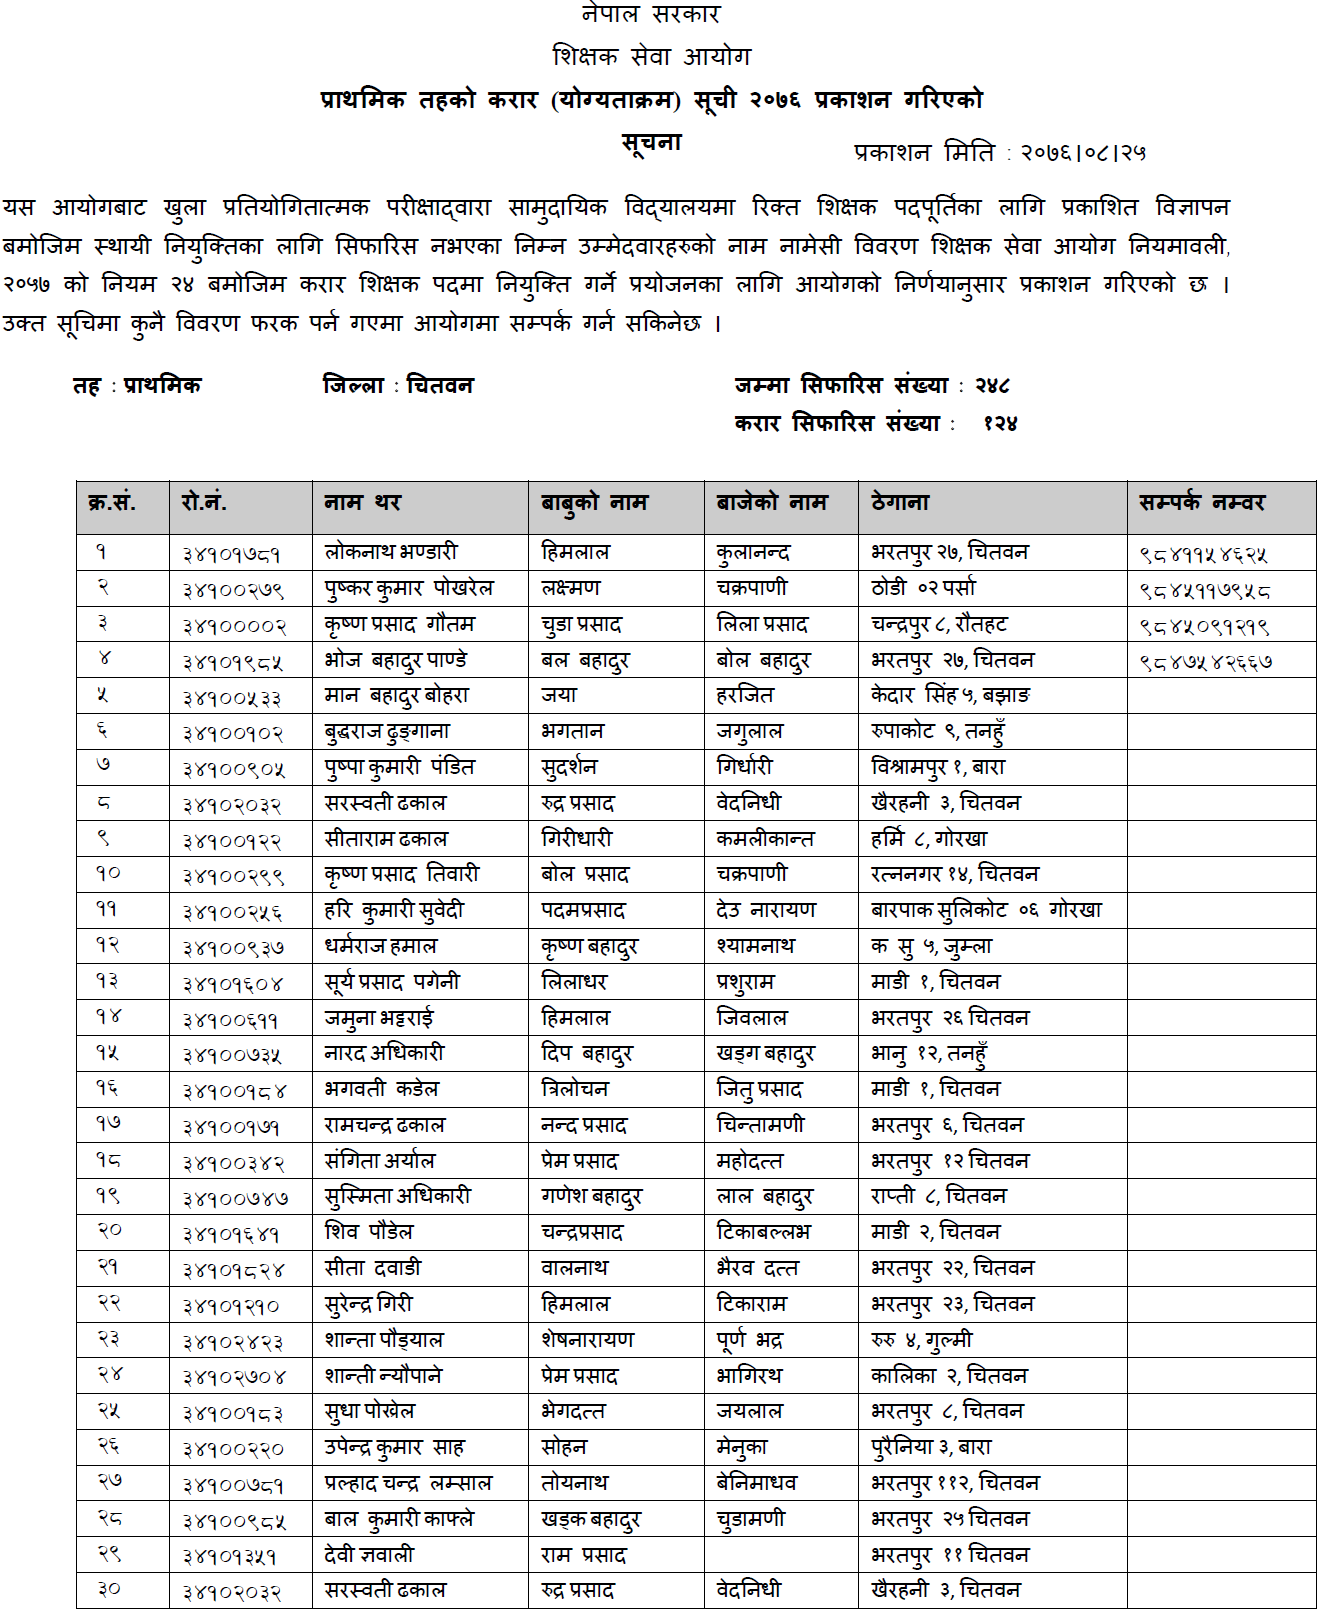 TSC Published Primary Level Contract List of Chitwan